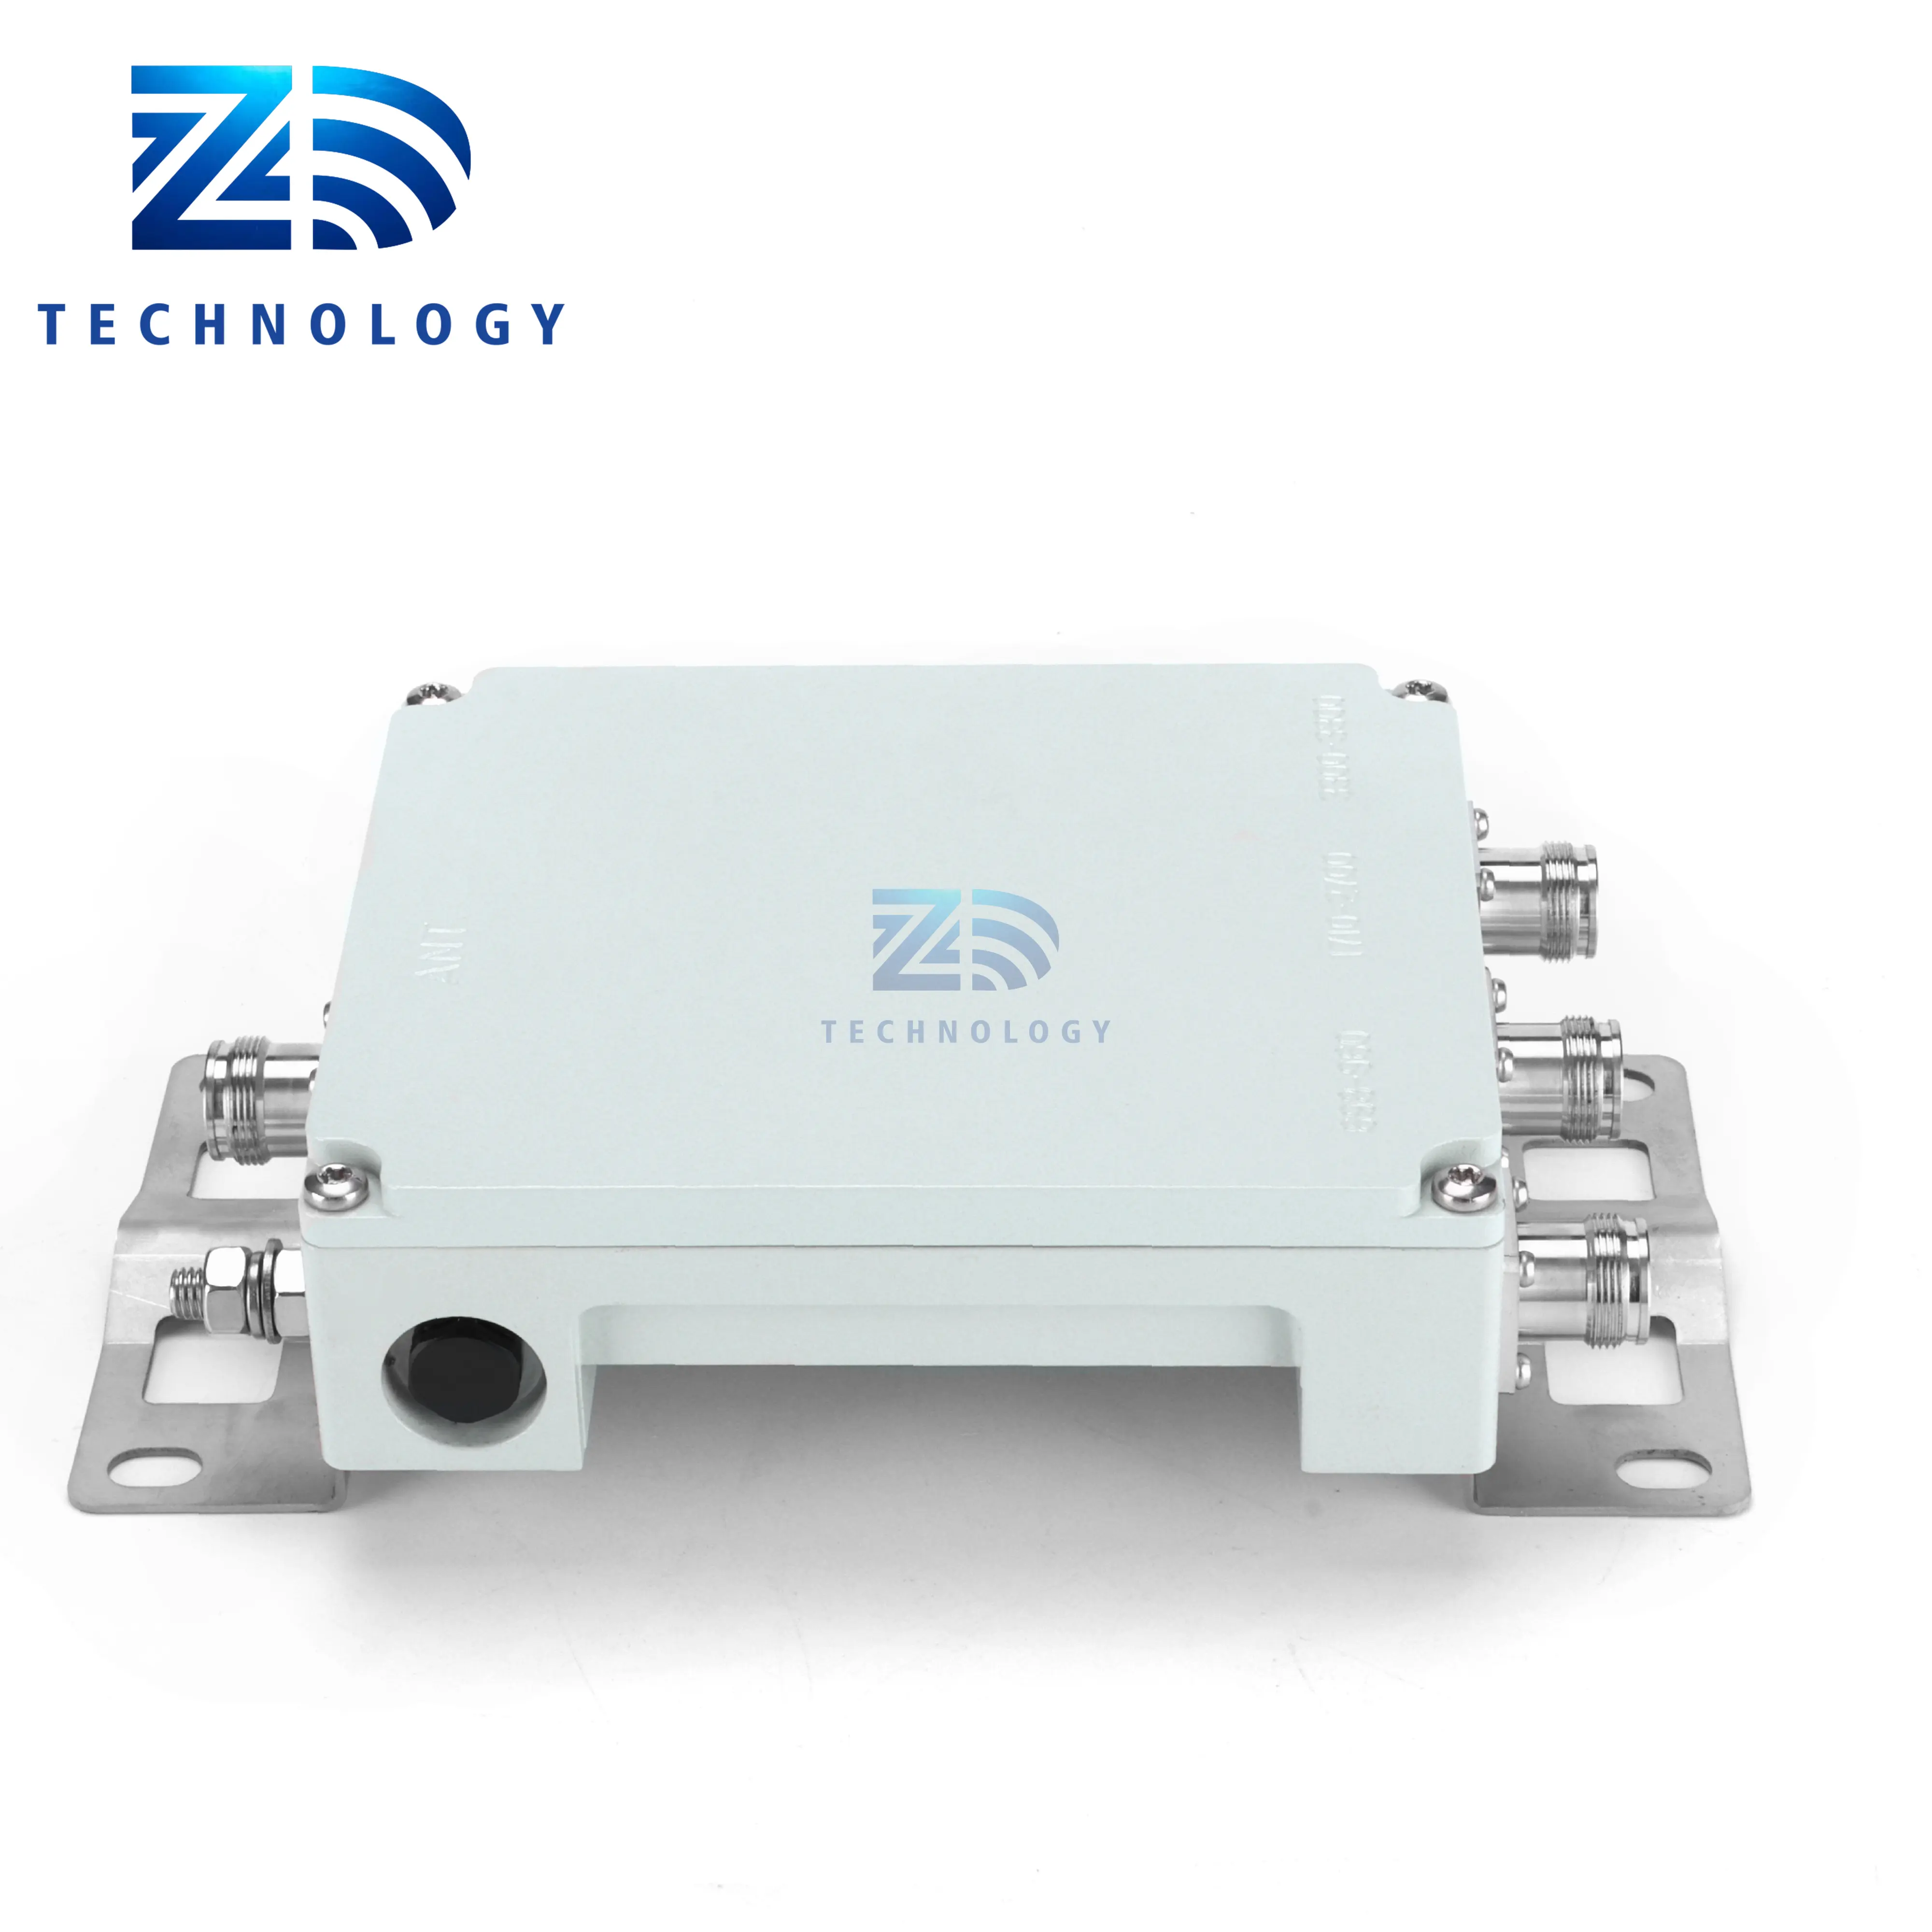 High Directivity / Isolation Combiner 3 Way Diplexer Rf With Low Insertion Loss Low VSWR Low PIM IM3 Triplexer Combiner